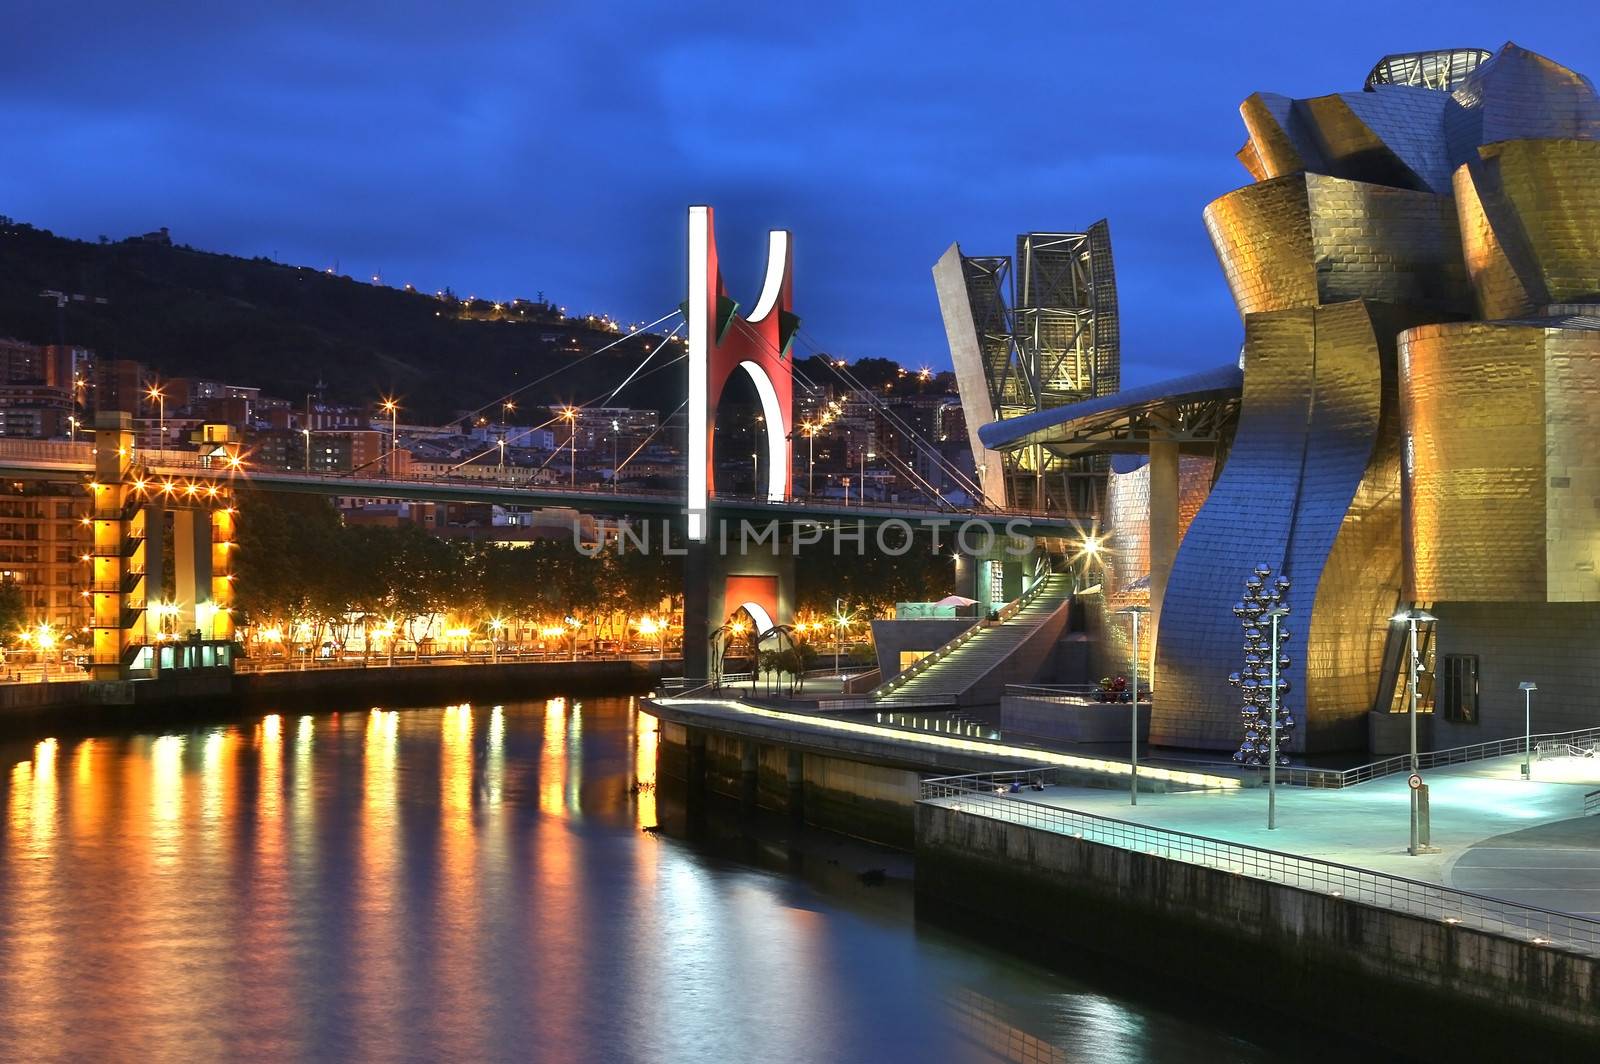 The seaport of Bilbao in the province of Biscay in northern Spain. View of the Nervion River, the Puente de la Salve (Bridge) and the Guggenheim Museum.